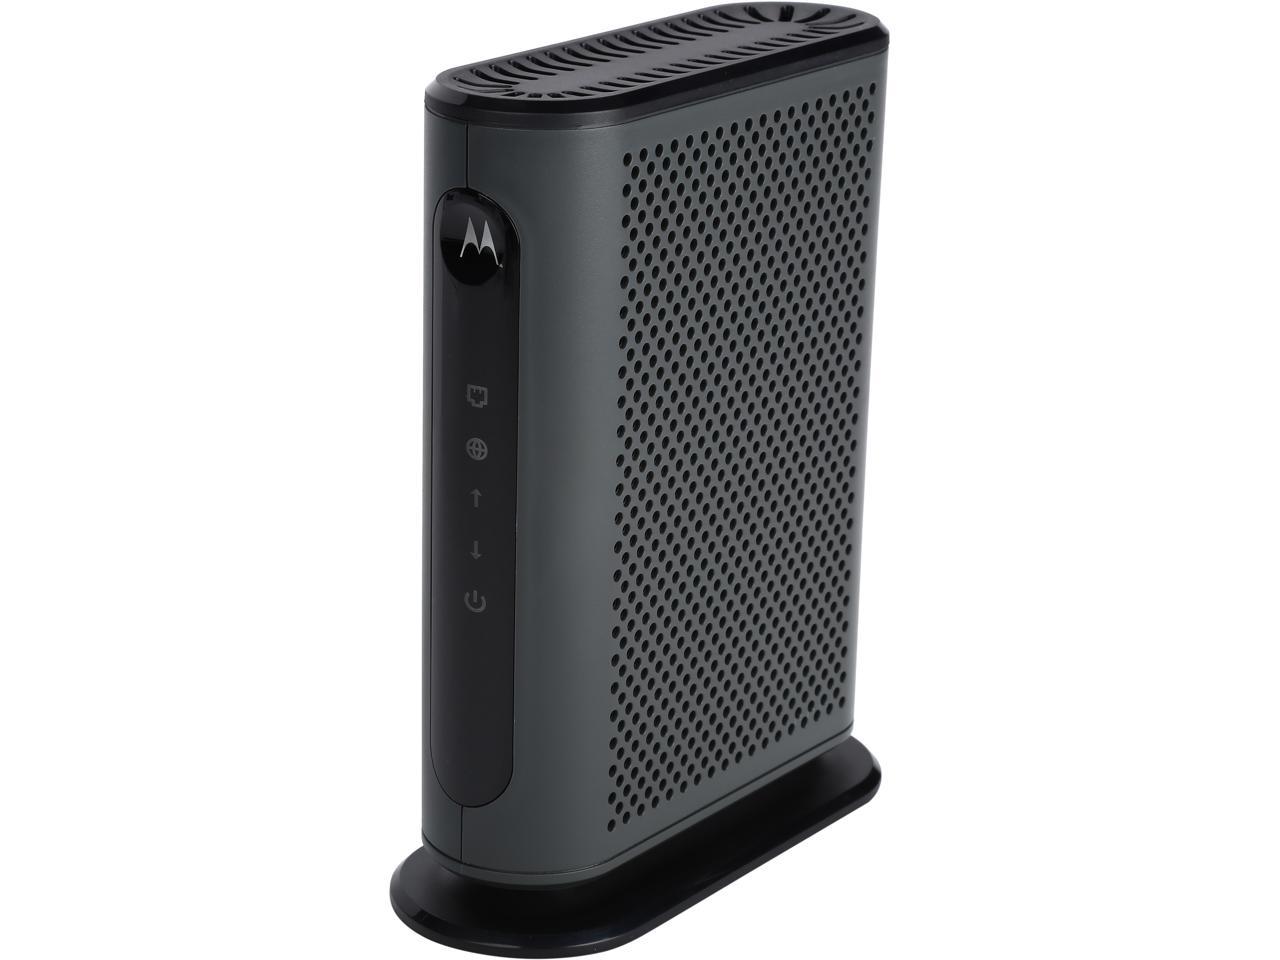 Motorola Mb7420 16x4 686 Mbps Docsis 3 0 Cable Modem Certified By Comcast Xfinity Time Warner Cable And Other Service Providers Newegg Com